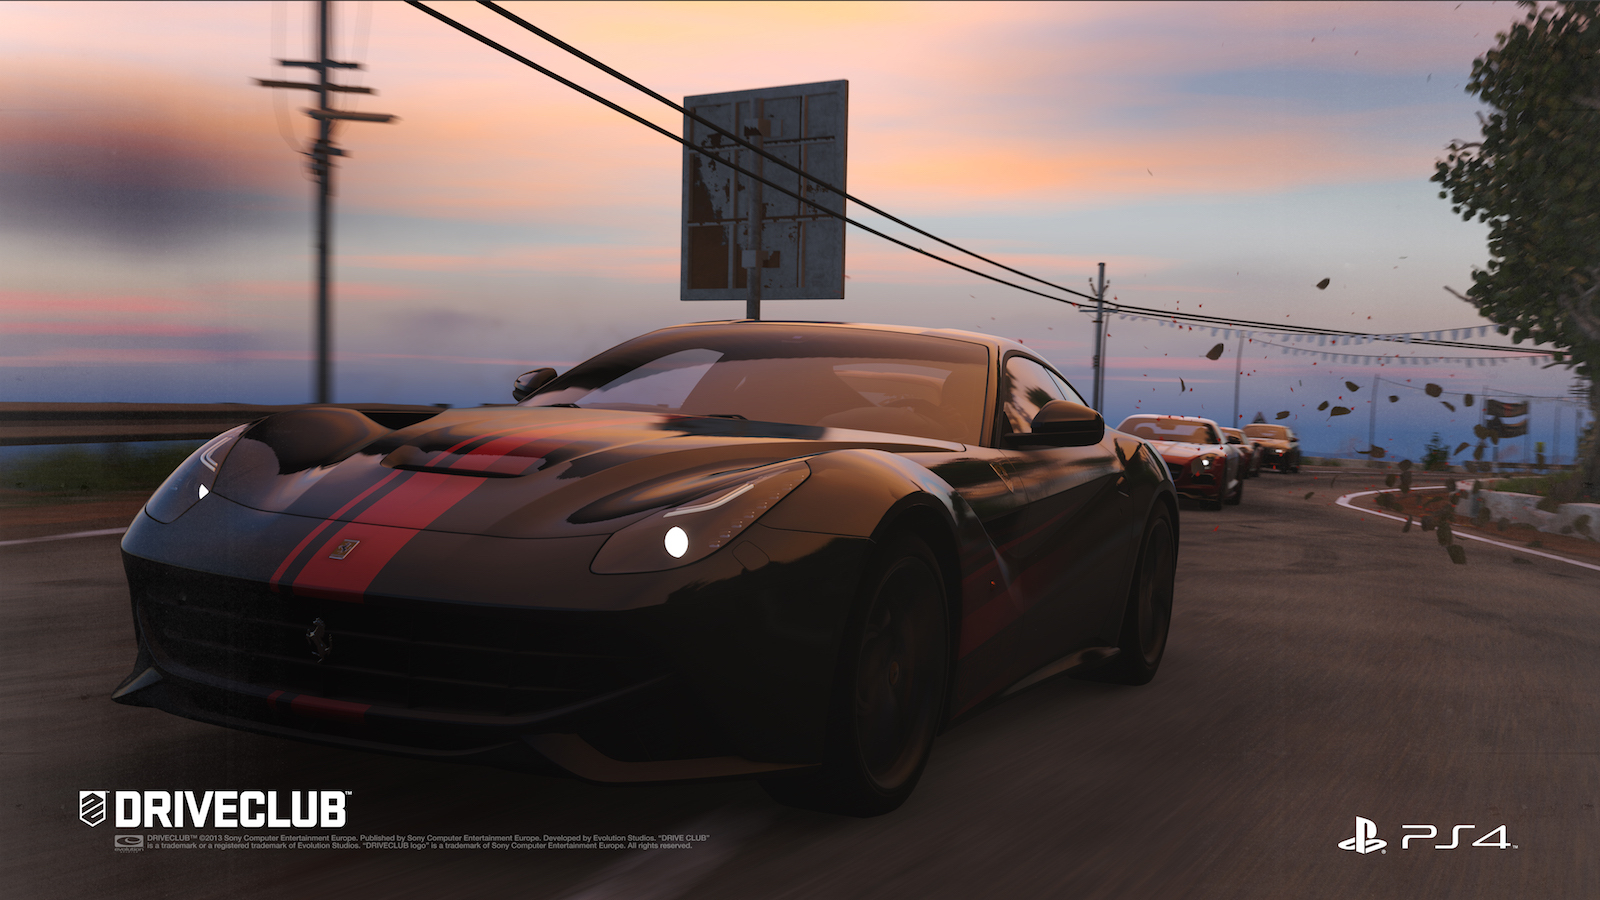 Driveclub review